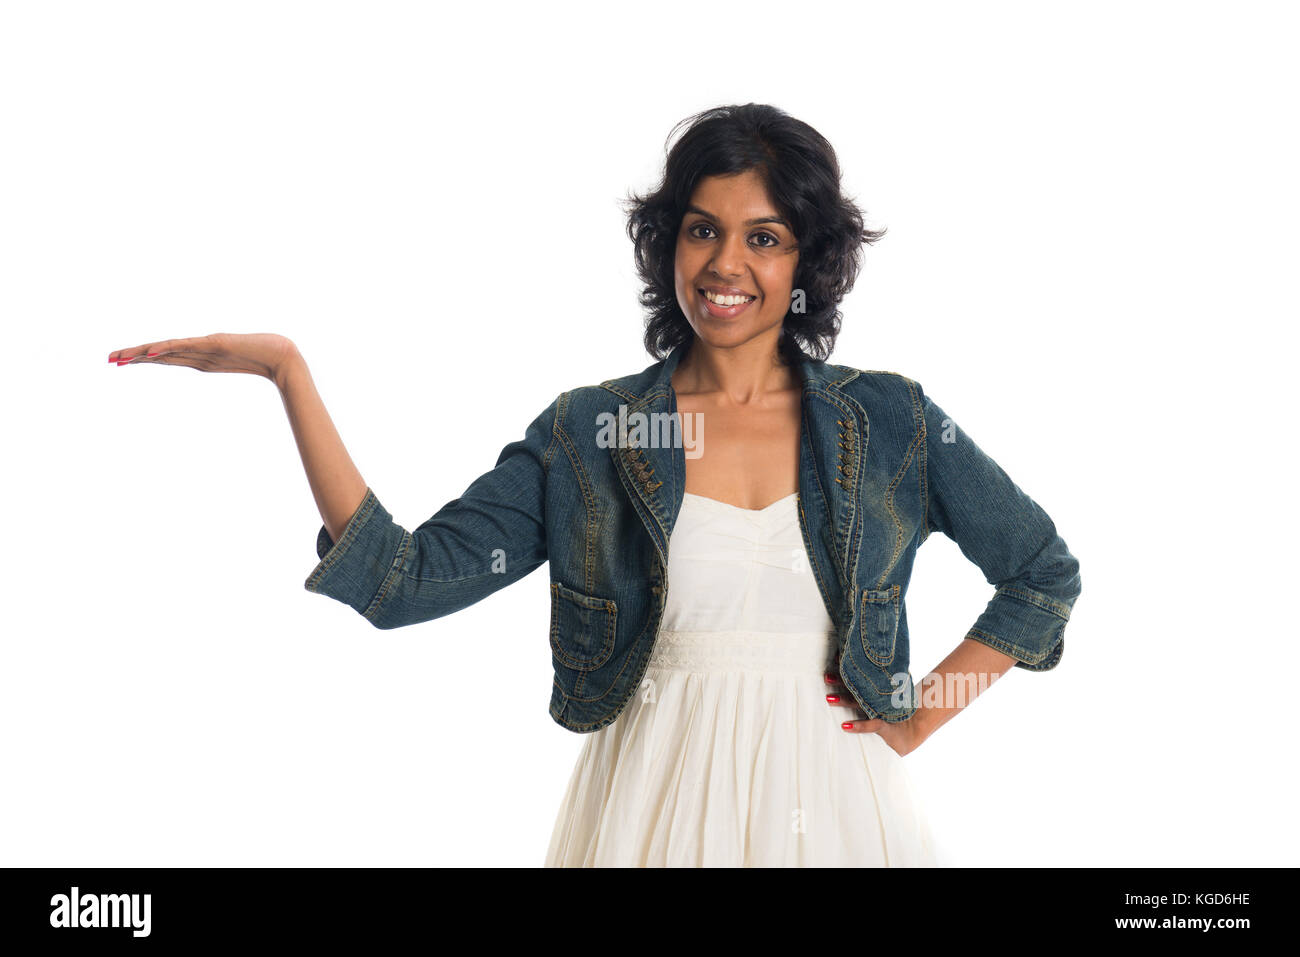 indian teenage girl holding a product Stock Photo